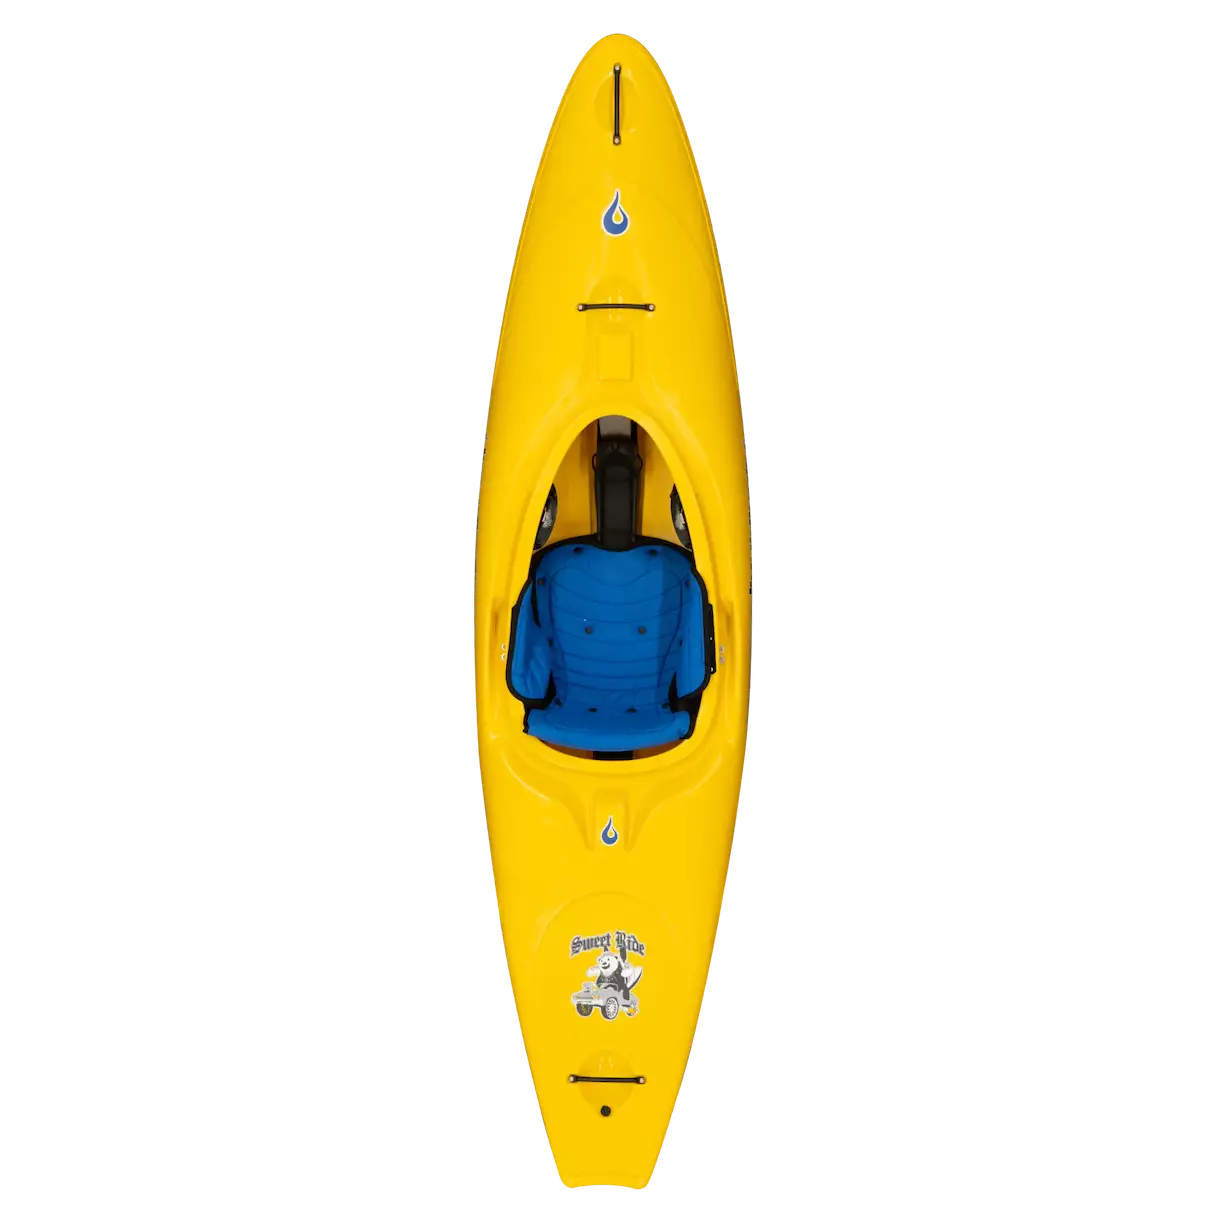 Featuring the Sweet Ride new, play boat, pre-order, river runner kayak manufactured by LiquidLogic shown here from a second angle.